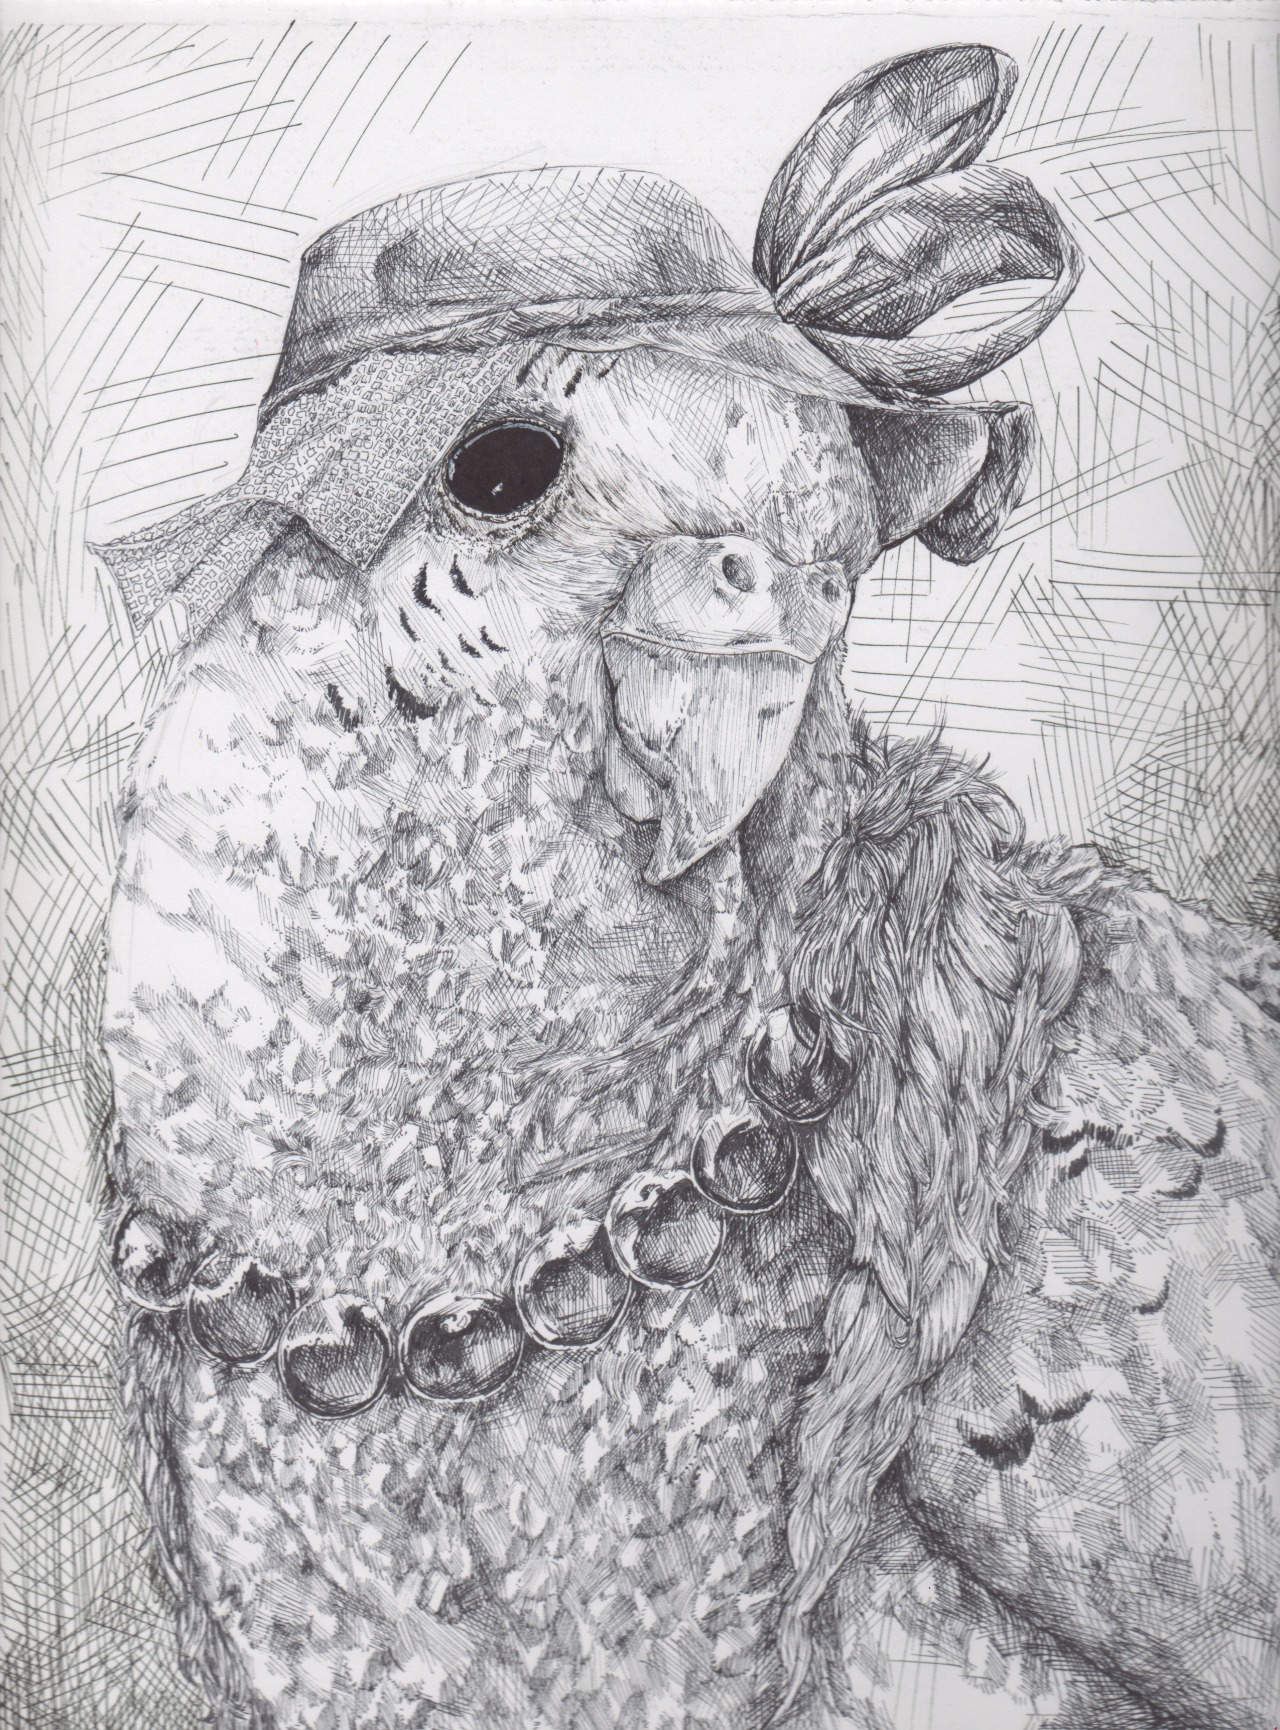 Hi. I like drawing animal portraits. If anyone’s interested you can see more on my drawing tumblr: http://mawil3.tumblr.com/